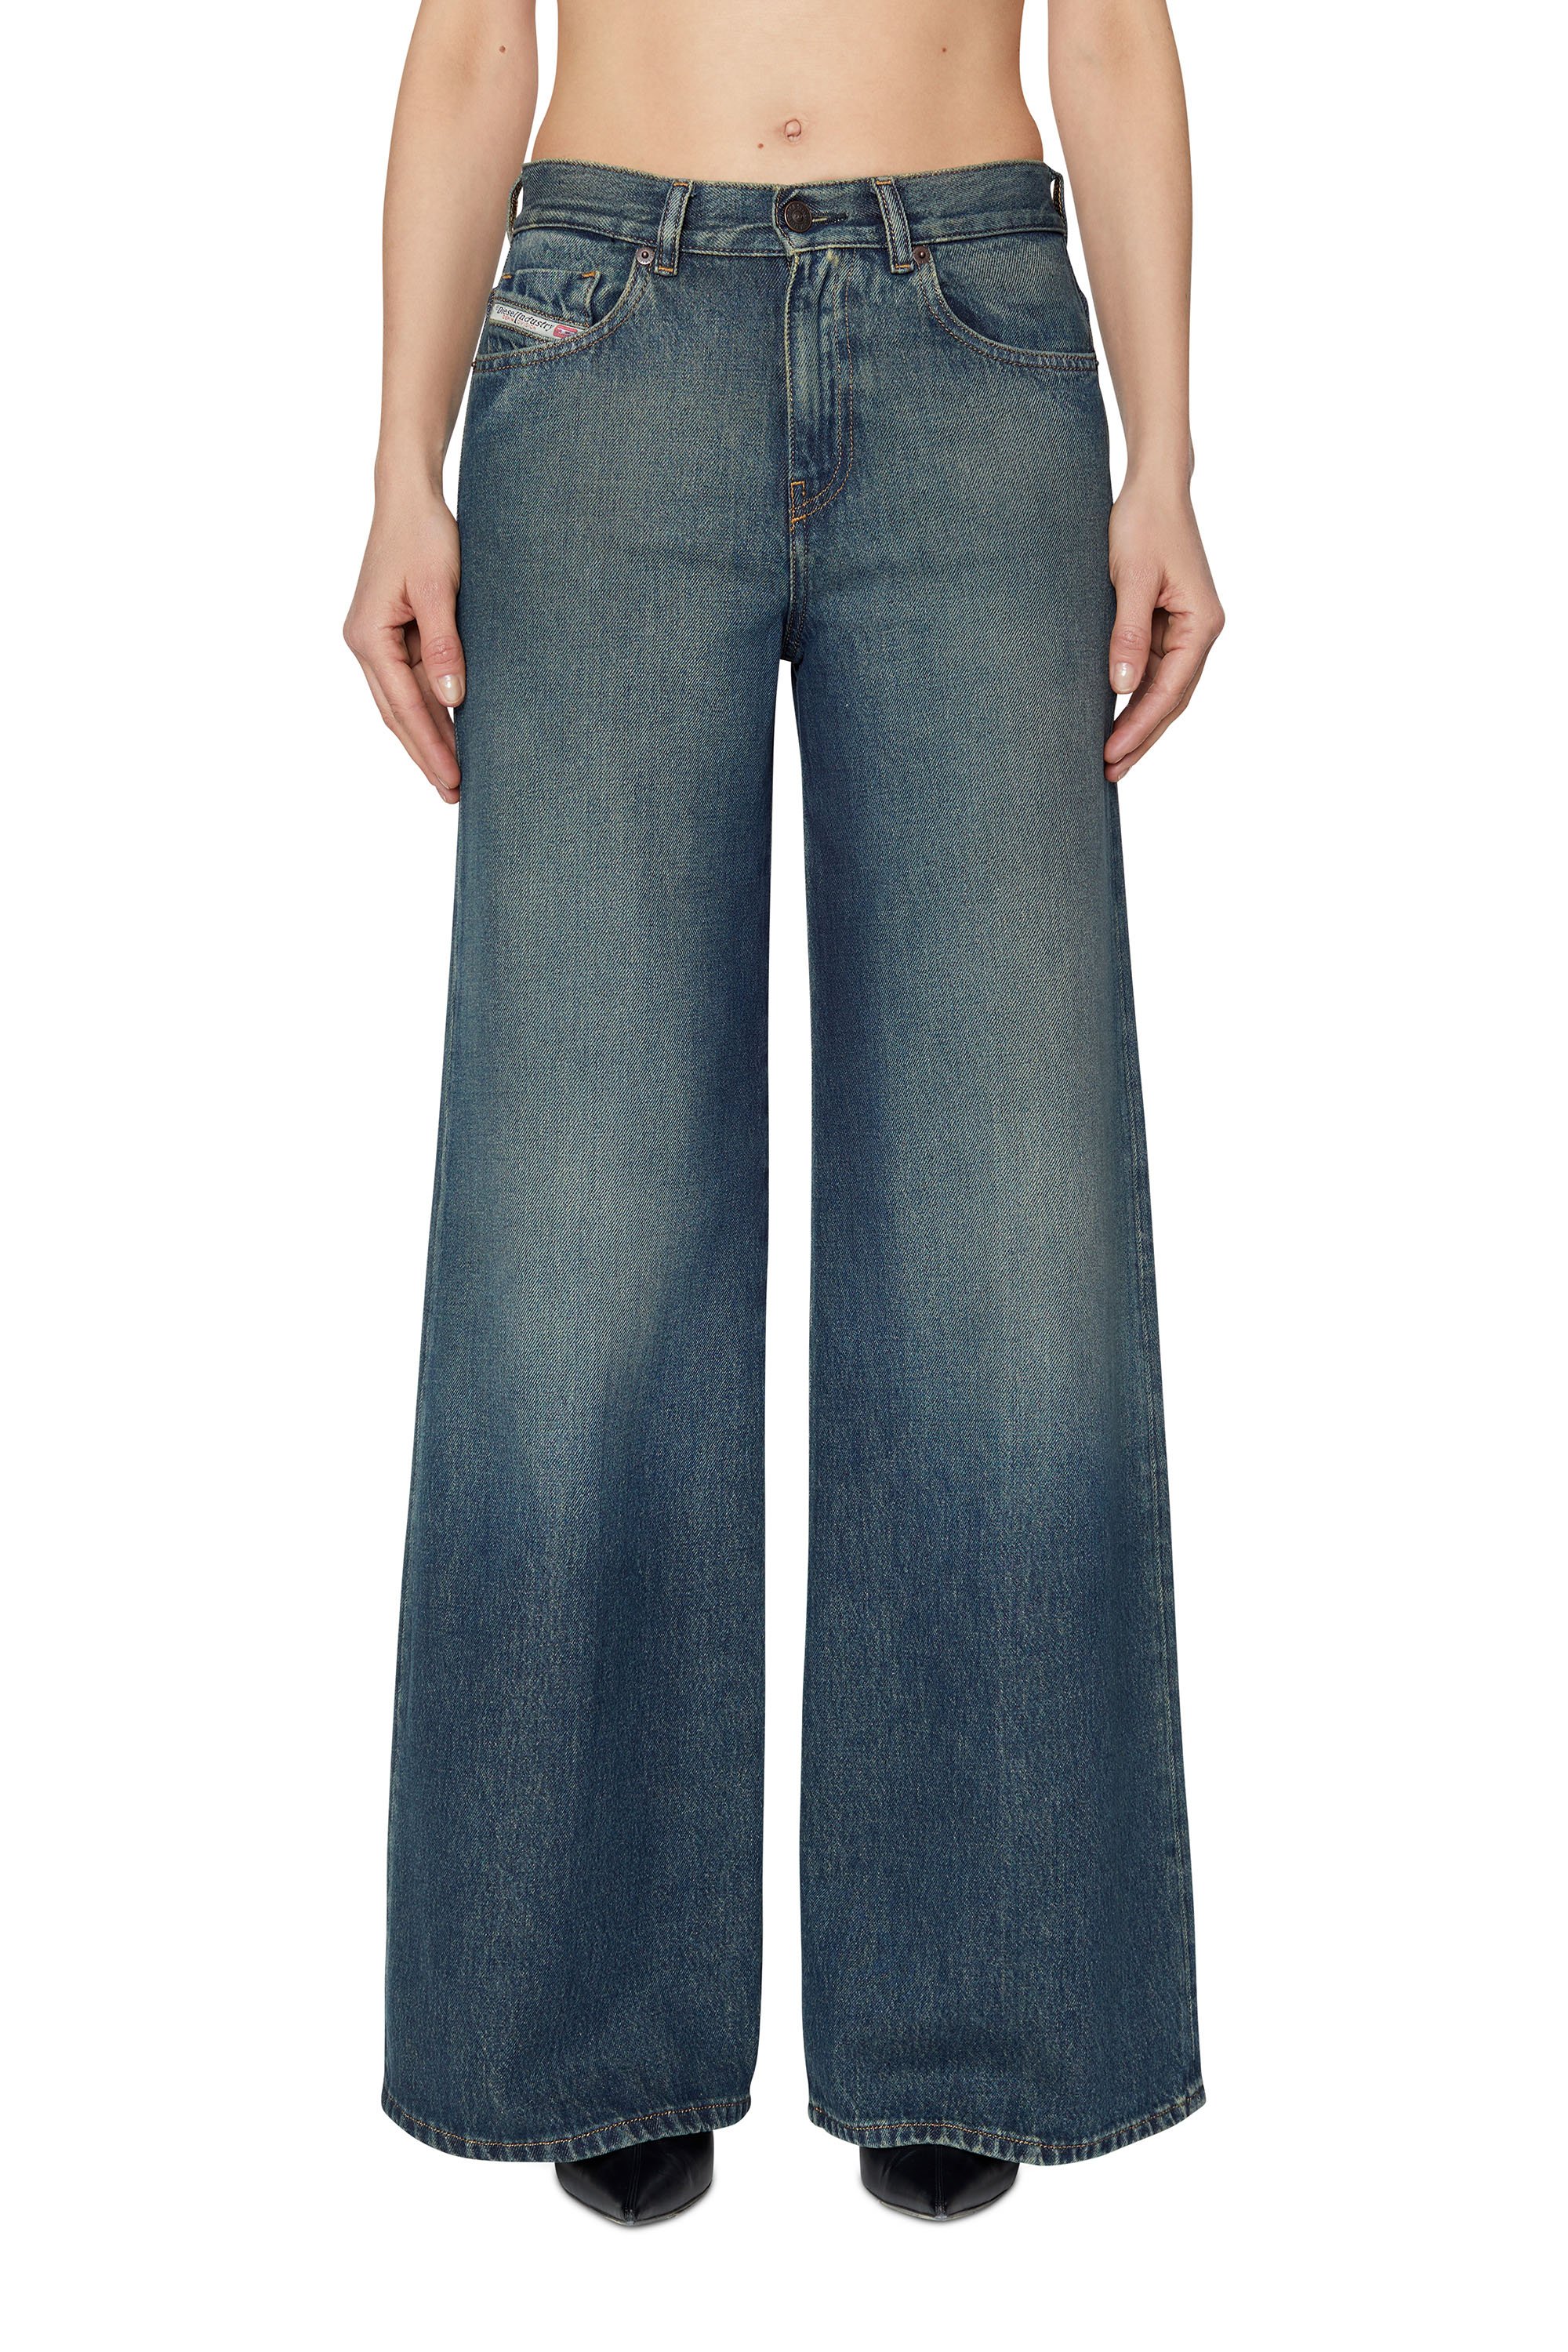 1978 09C04 Bootcut and Flare Jeans, ダークブルー - ジーンズ